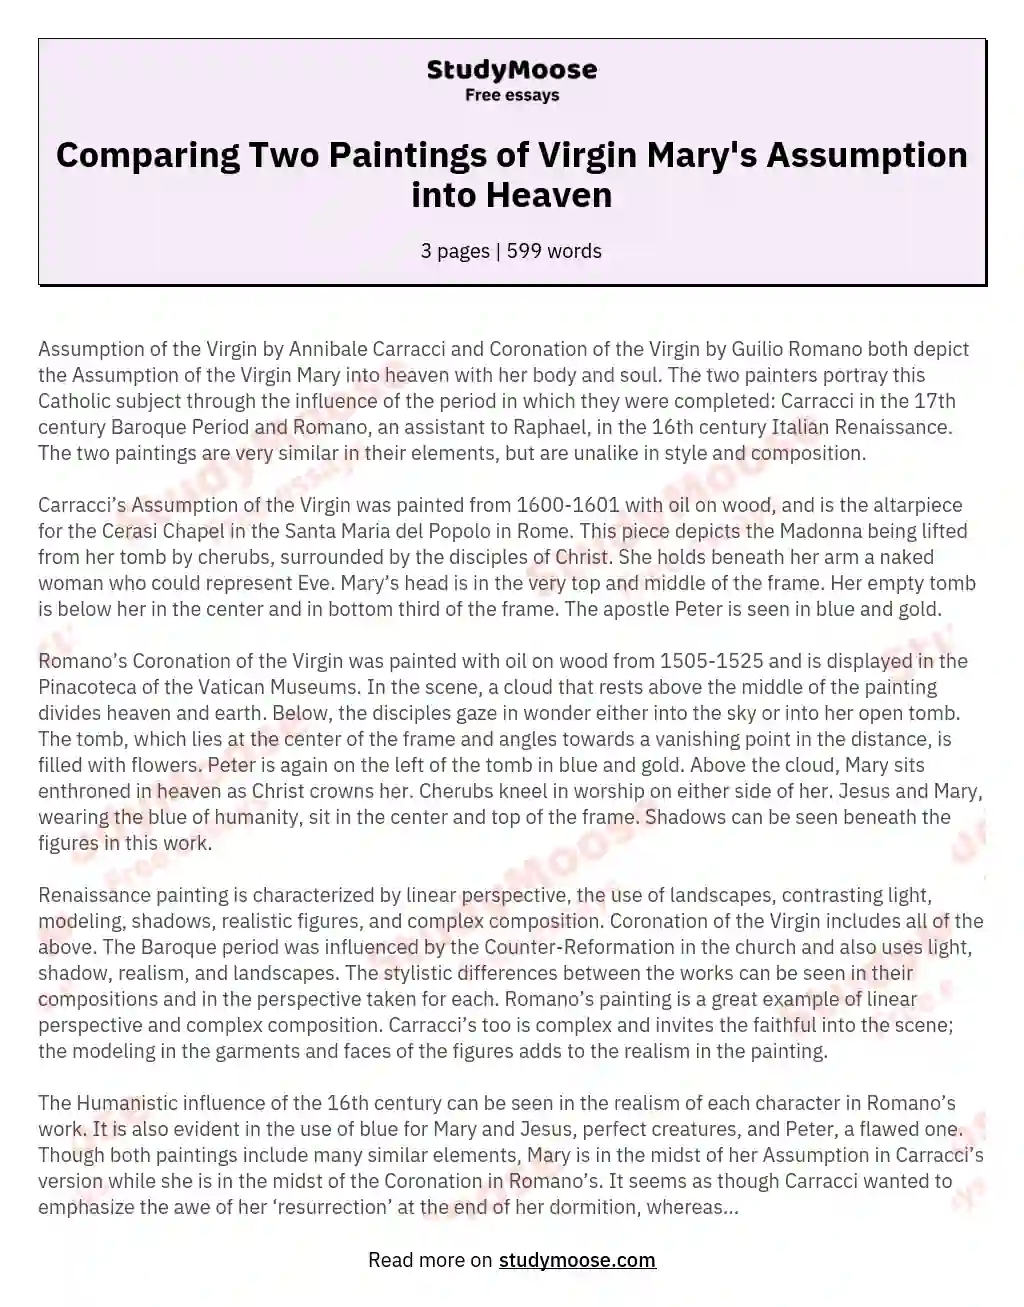 Comparing Two Paintings of Virgin Mary's Assumption into Heaven essay